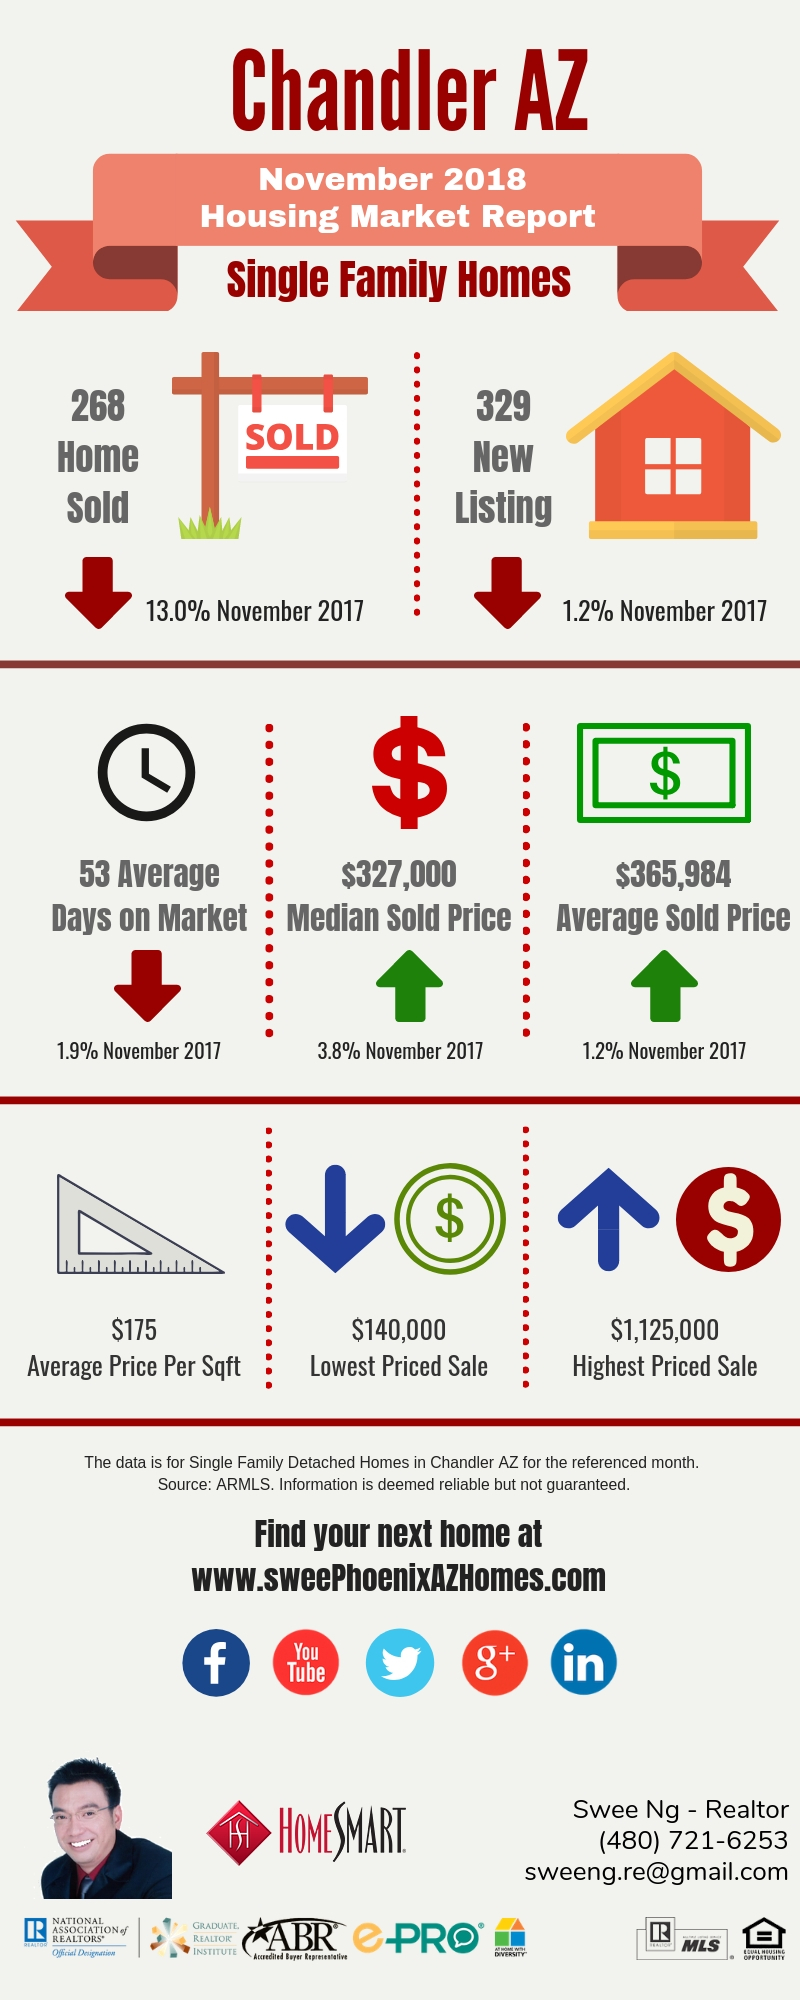 Chandler AZ Housing Market Update November 2018 by Swee Ng, House Value and Real Estate Listings